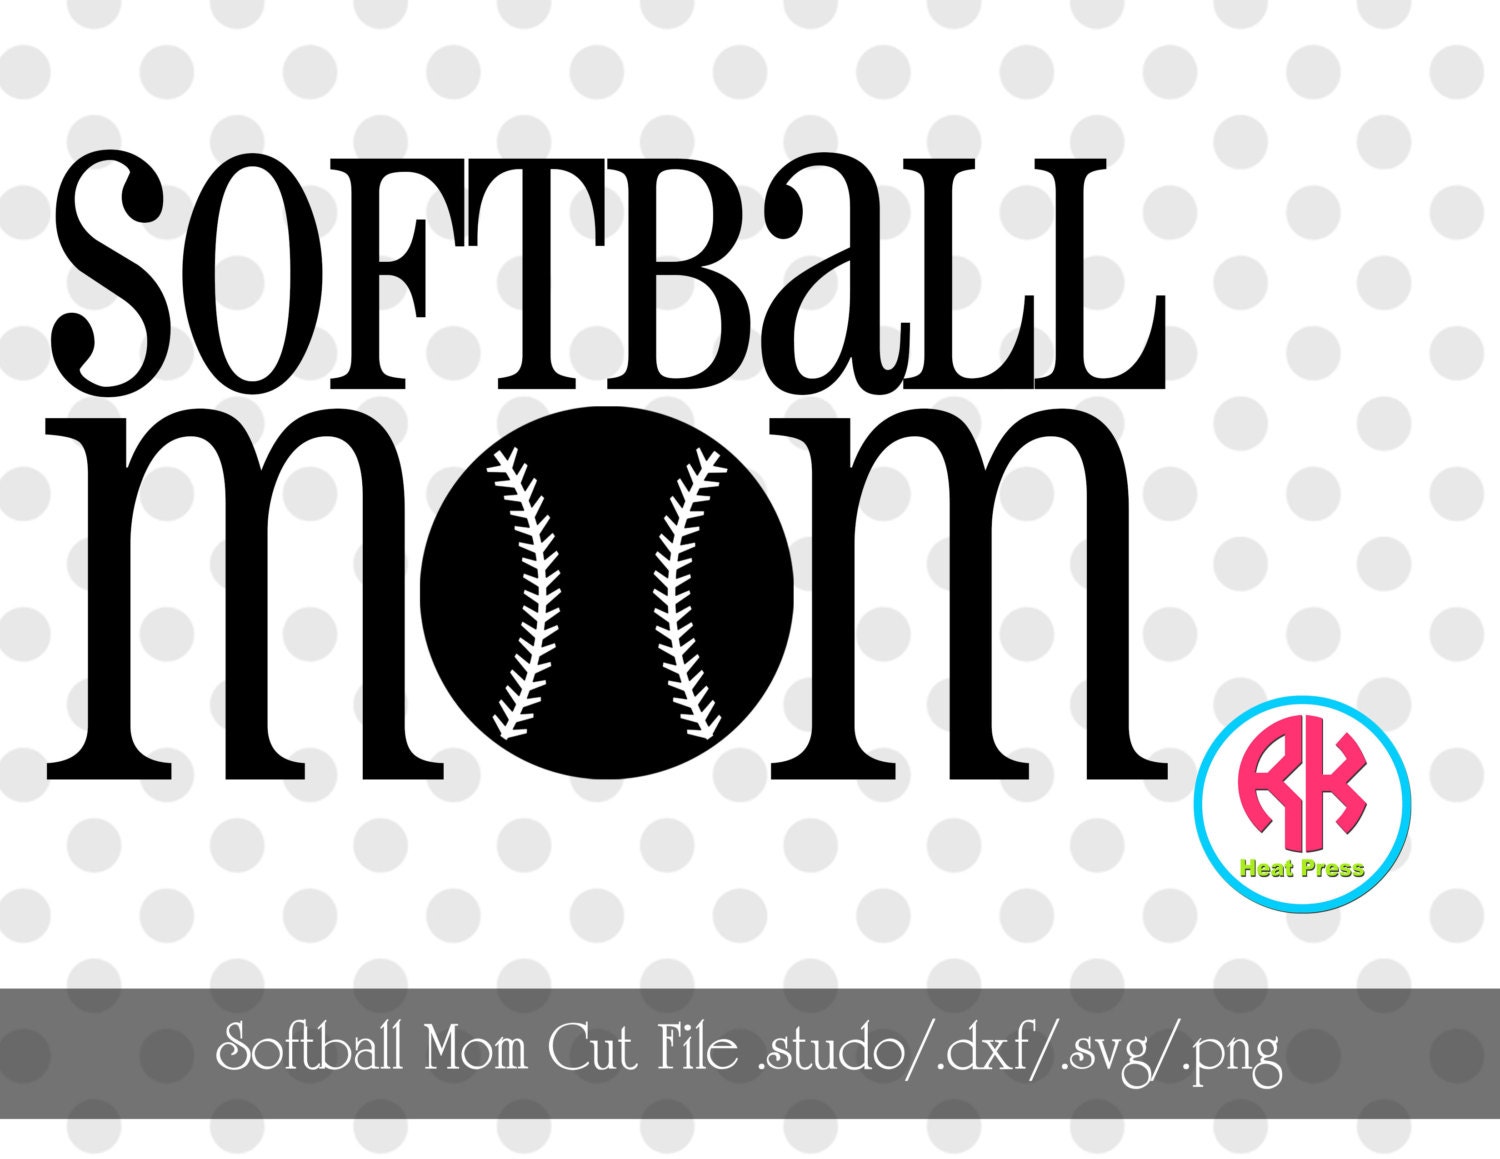 Download Softball Mom Cut Files .PNG .DXF .SVG